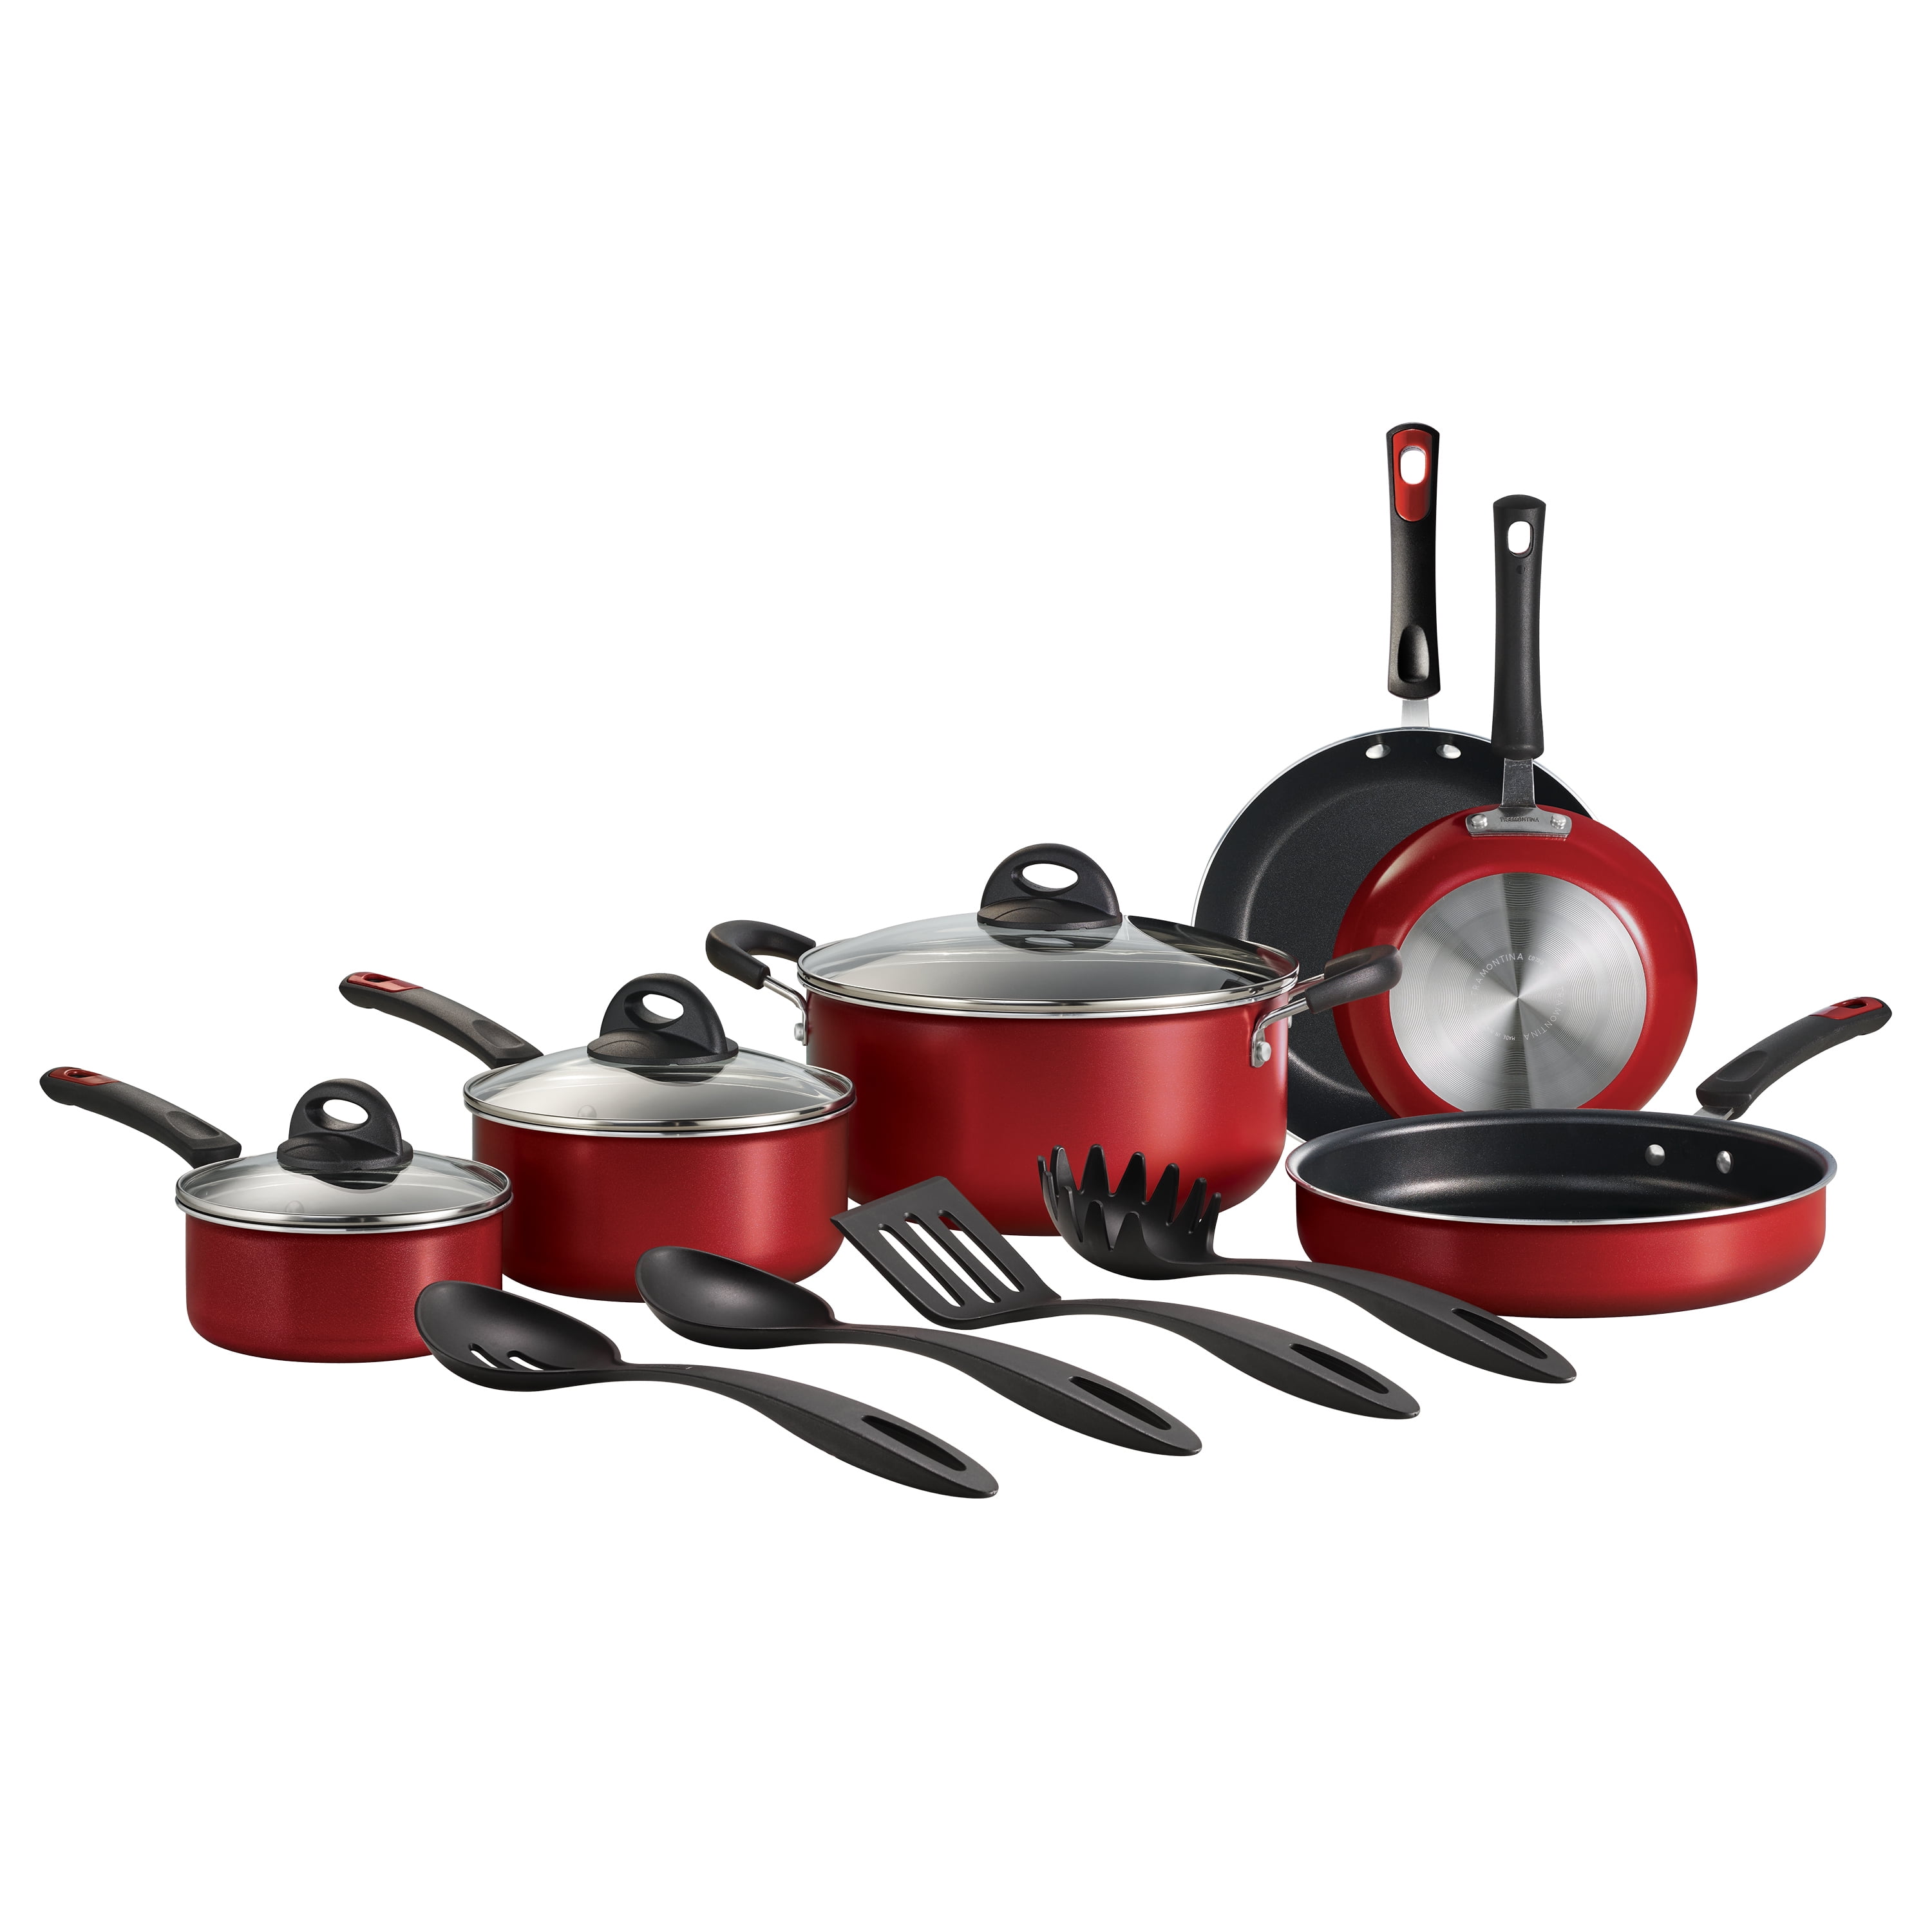  Emeril Everyday Forever Pans Hard-Anodized Pots and Pans Set  Nonstick, Induction Cookware with Utensils by Emeril Lagasse, Black, 10-pc  Cookware Set + Cookbook (10 Pc with Cookbook) OPEN BOX: Home 